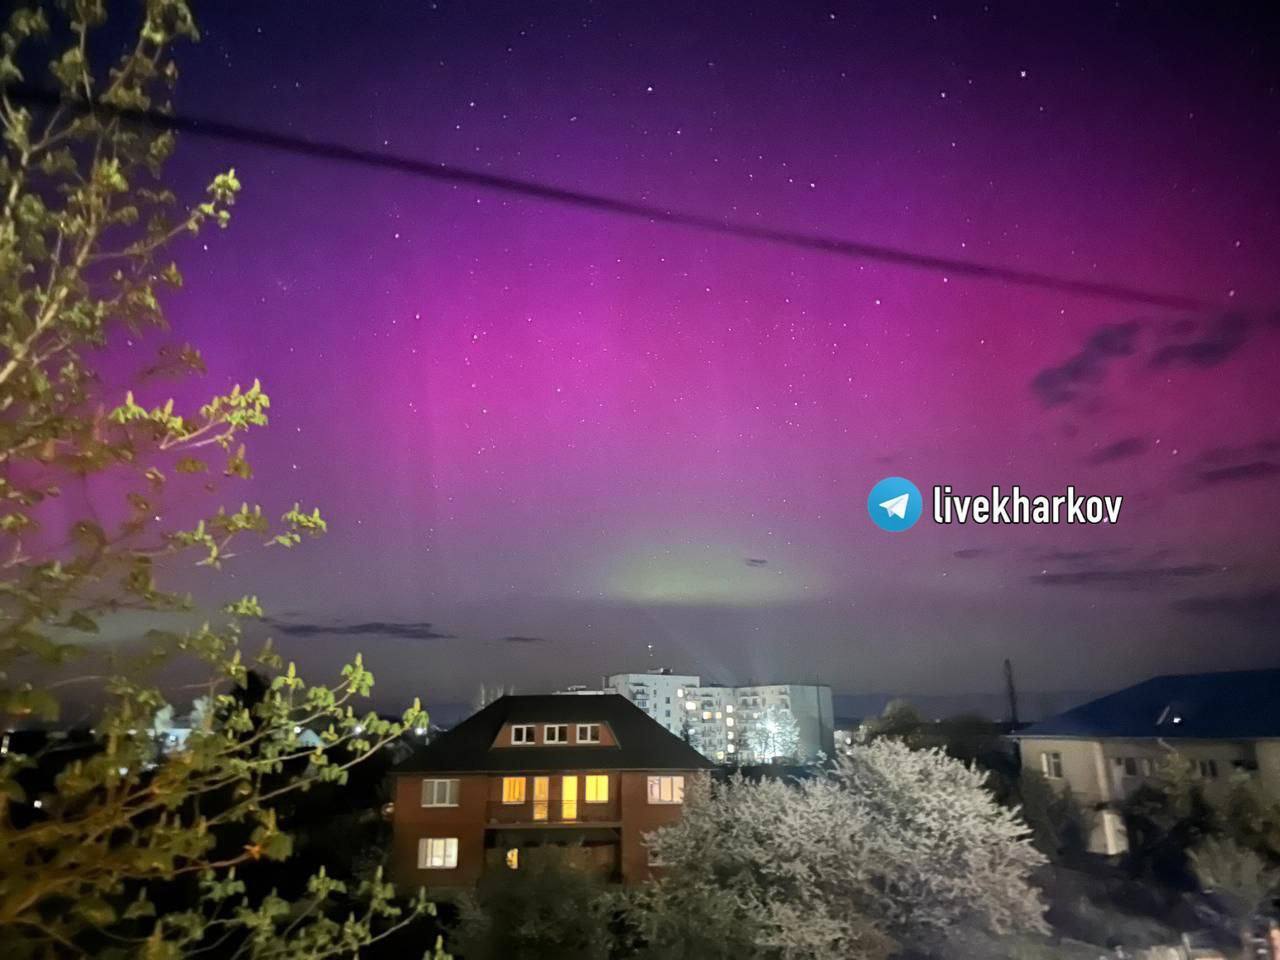 The Northern lights in the sky over Kharkiv.